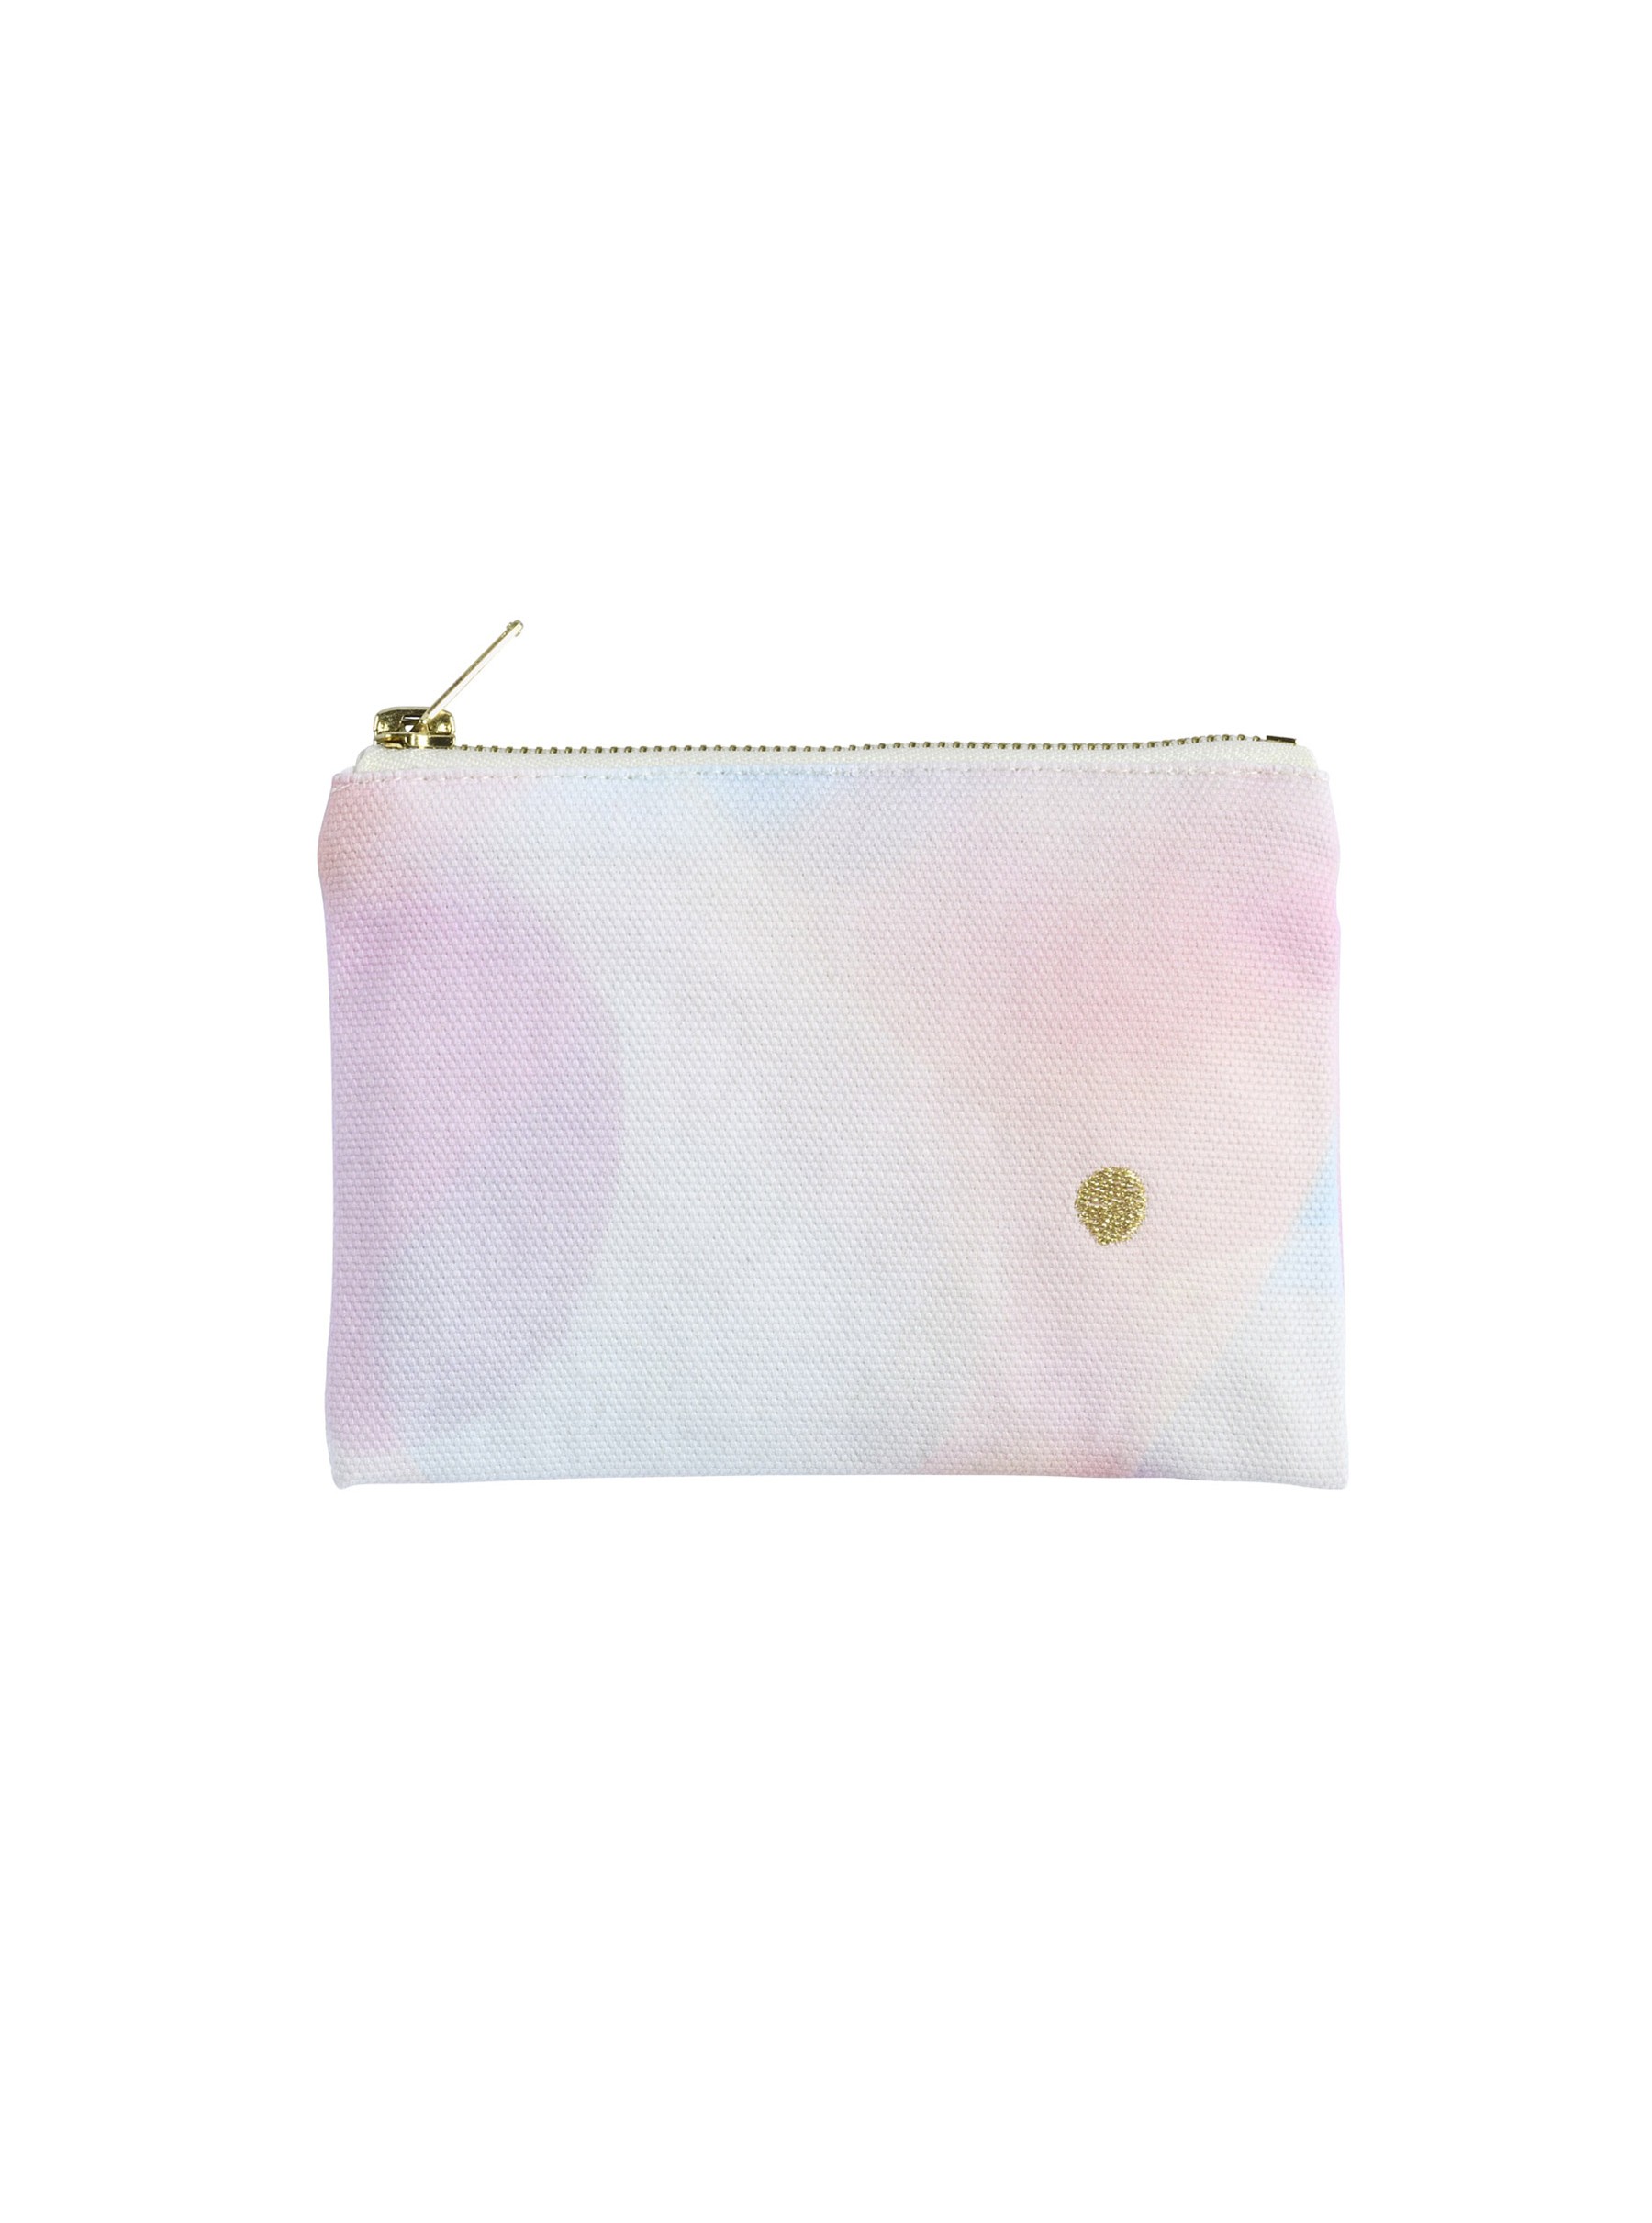 POUCH IONA LUCIA S